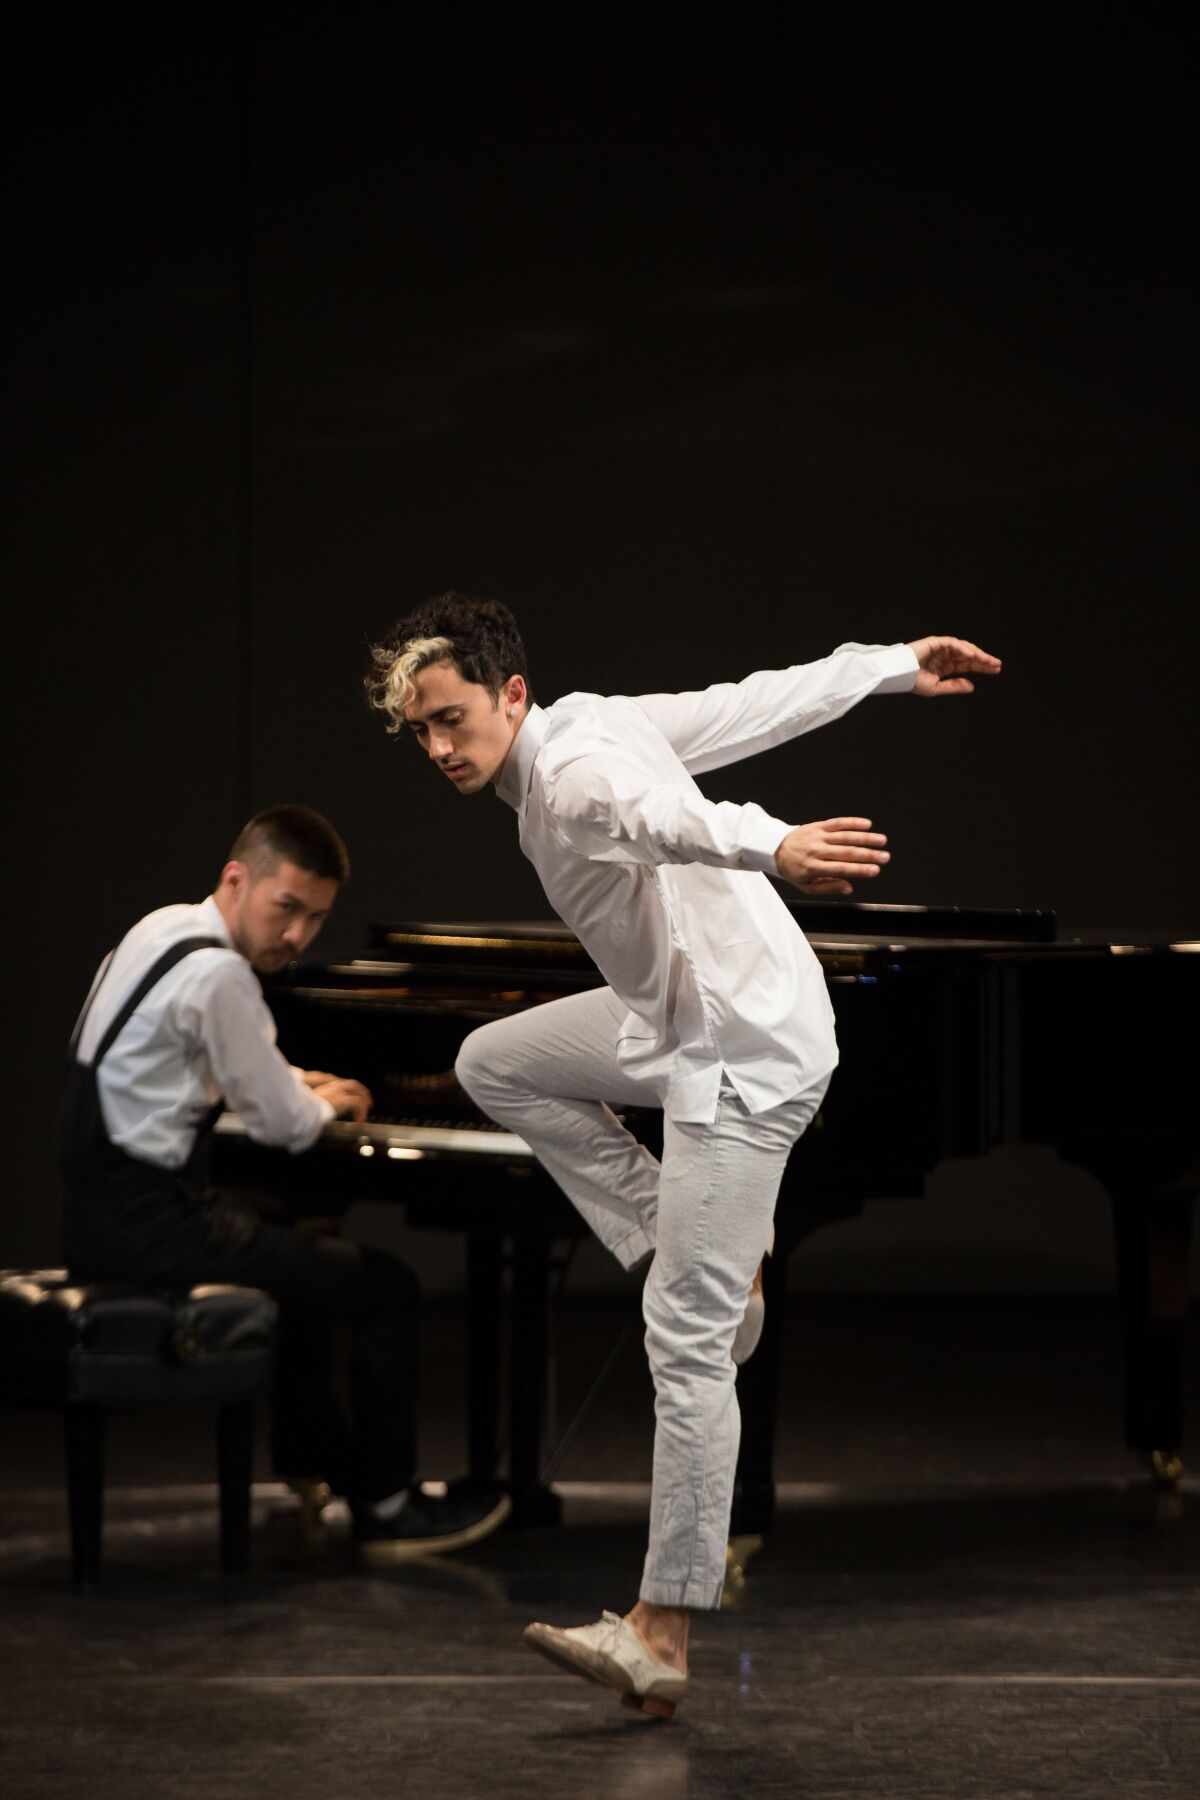 Pianist and composer Conrad Tao and choreographer and tap dancer Caleb Teicher will perform Feb. 4 in La Jolla.